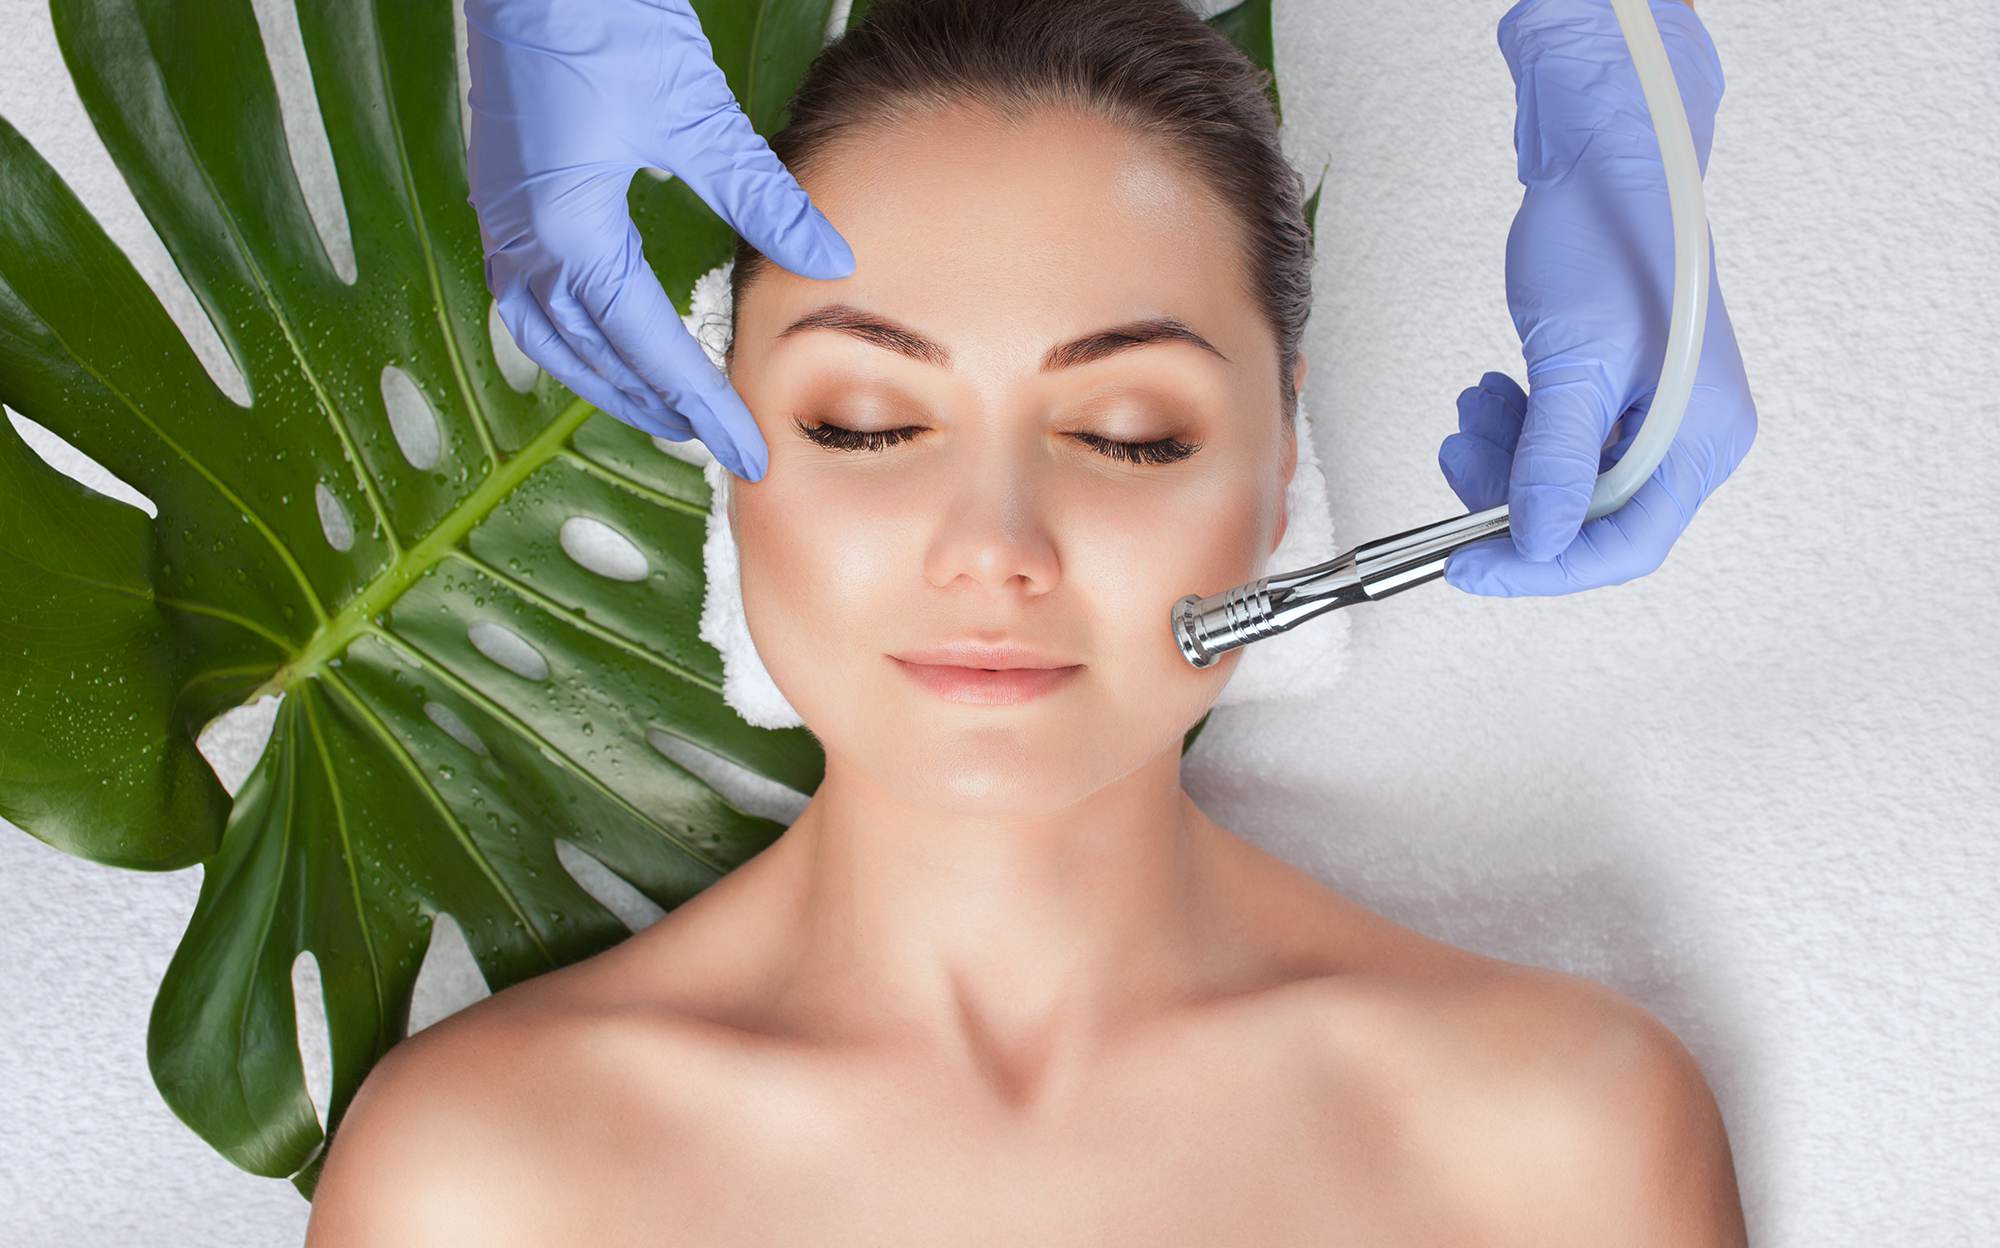 MICRODERMABRASION TREATMENTS